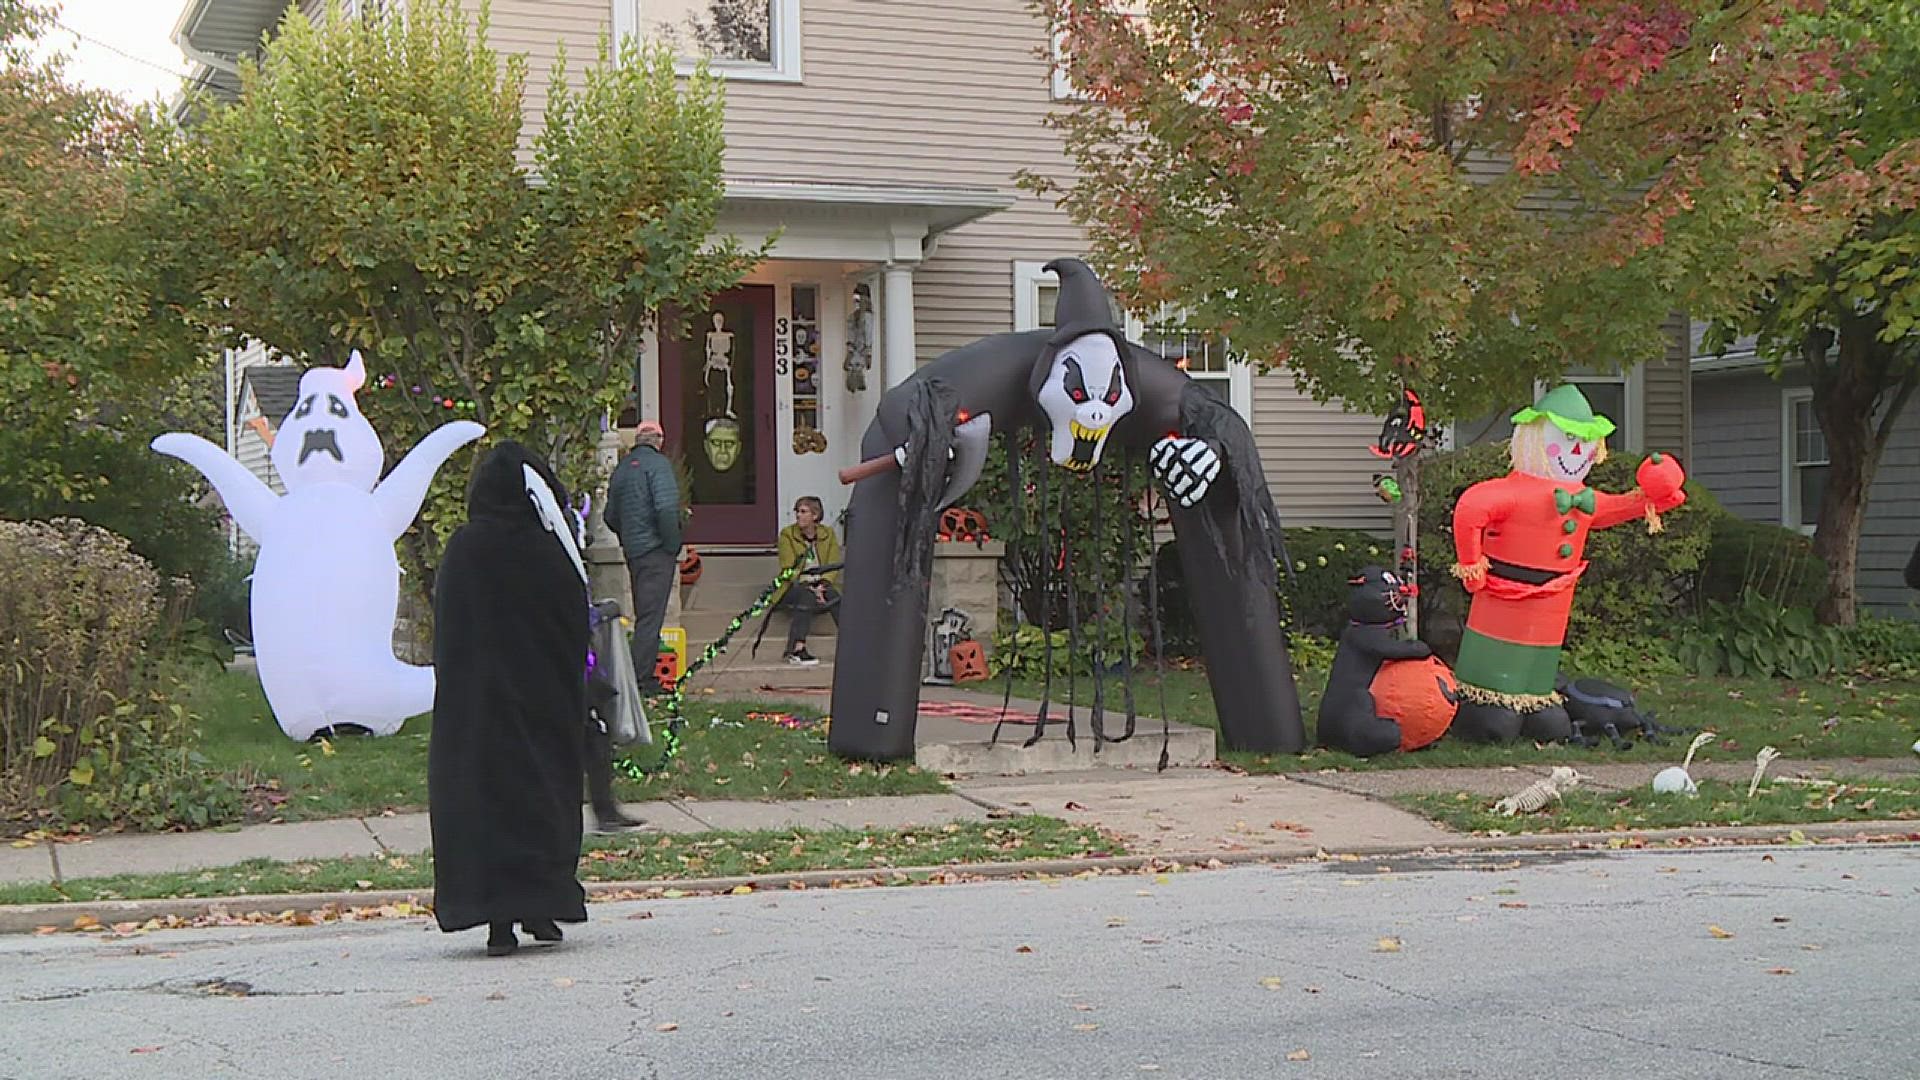 One Davenport neighborhood sees almost 500 trickortreaters